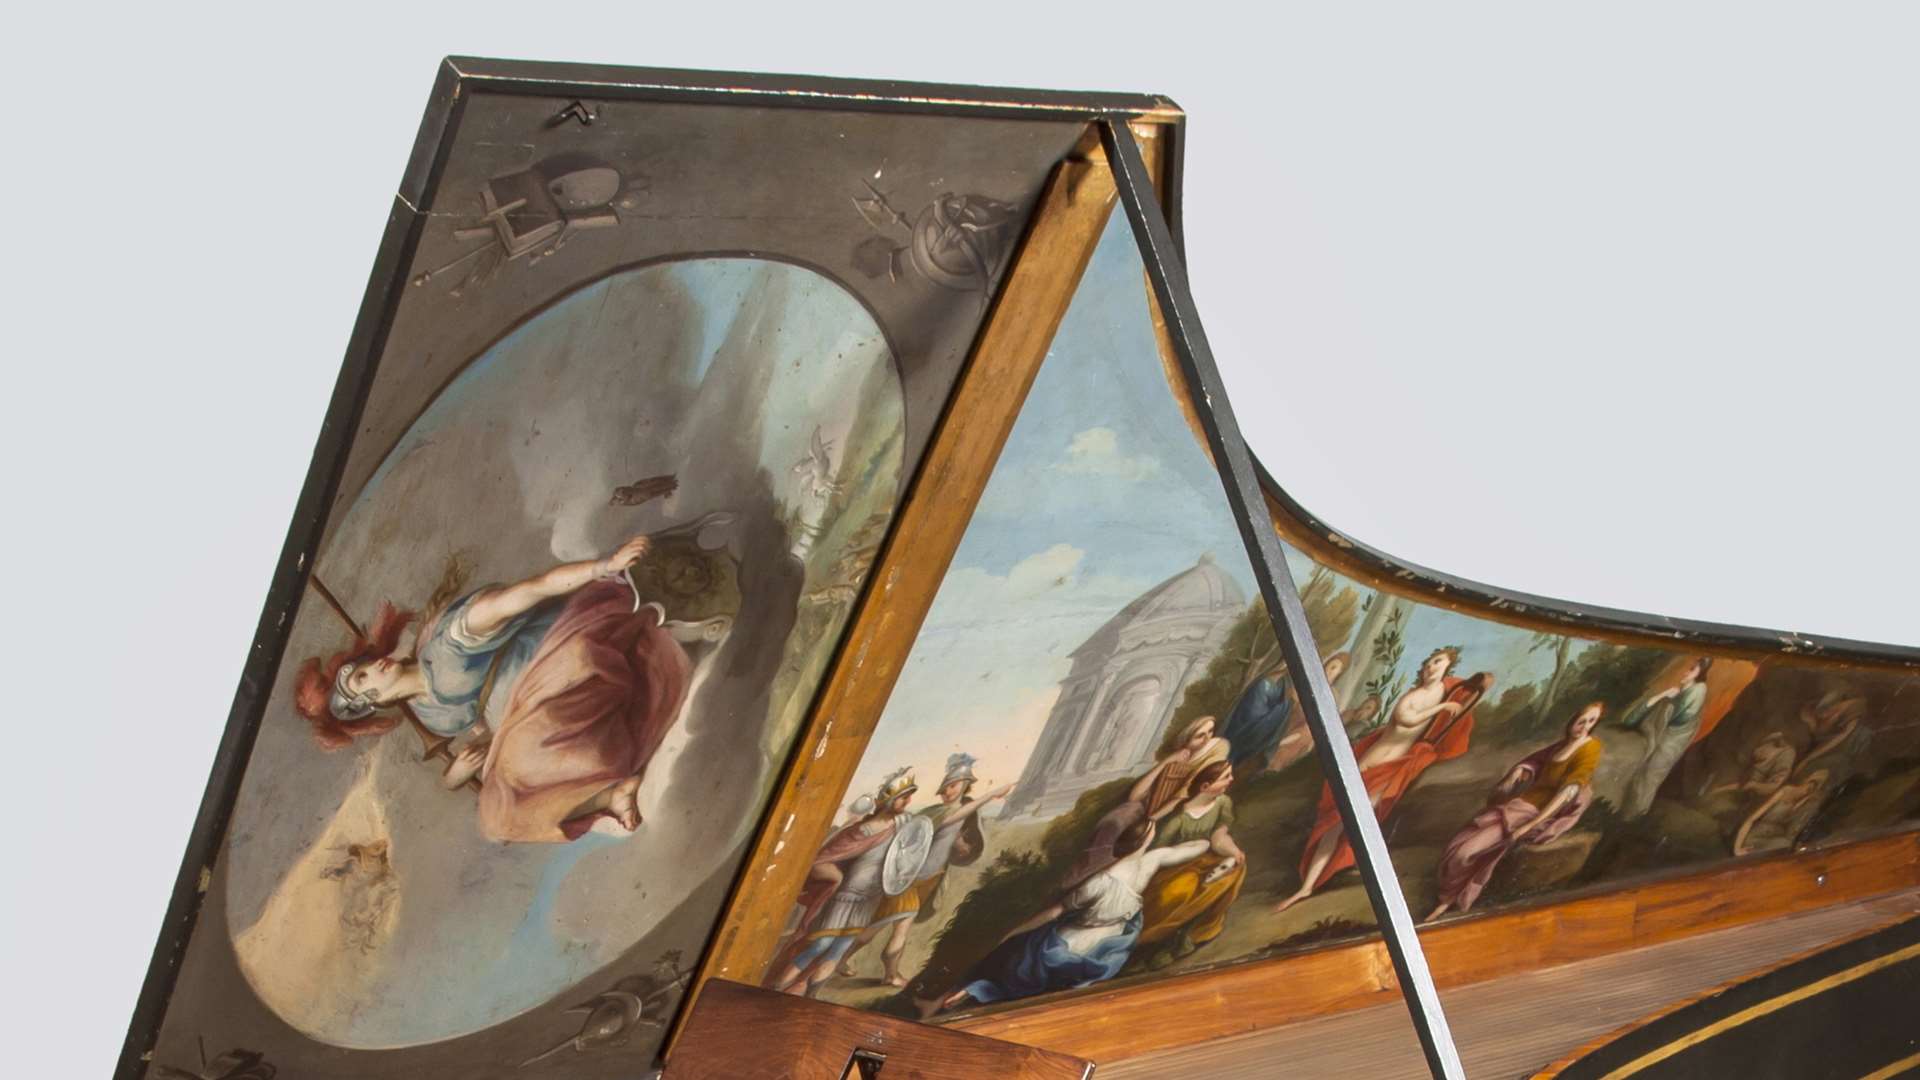 Detail from the Antunes harpsichord